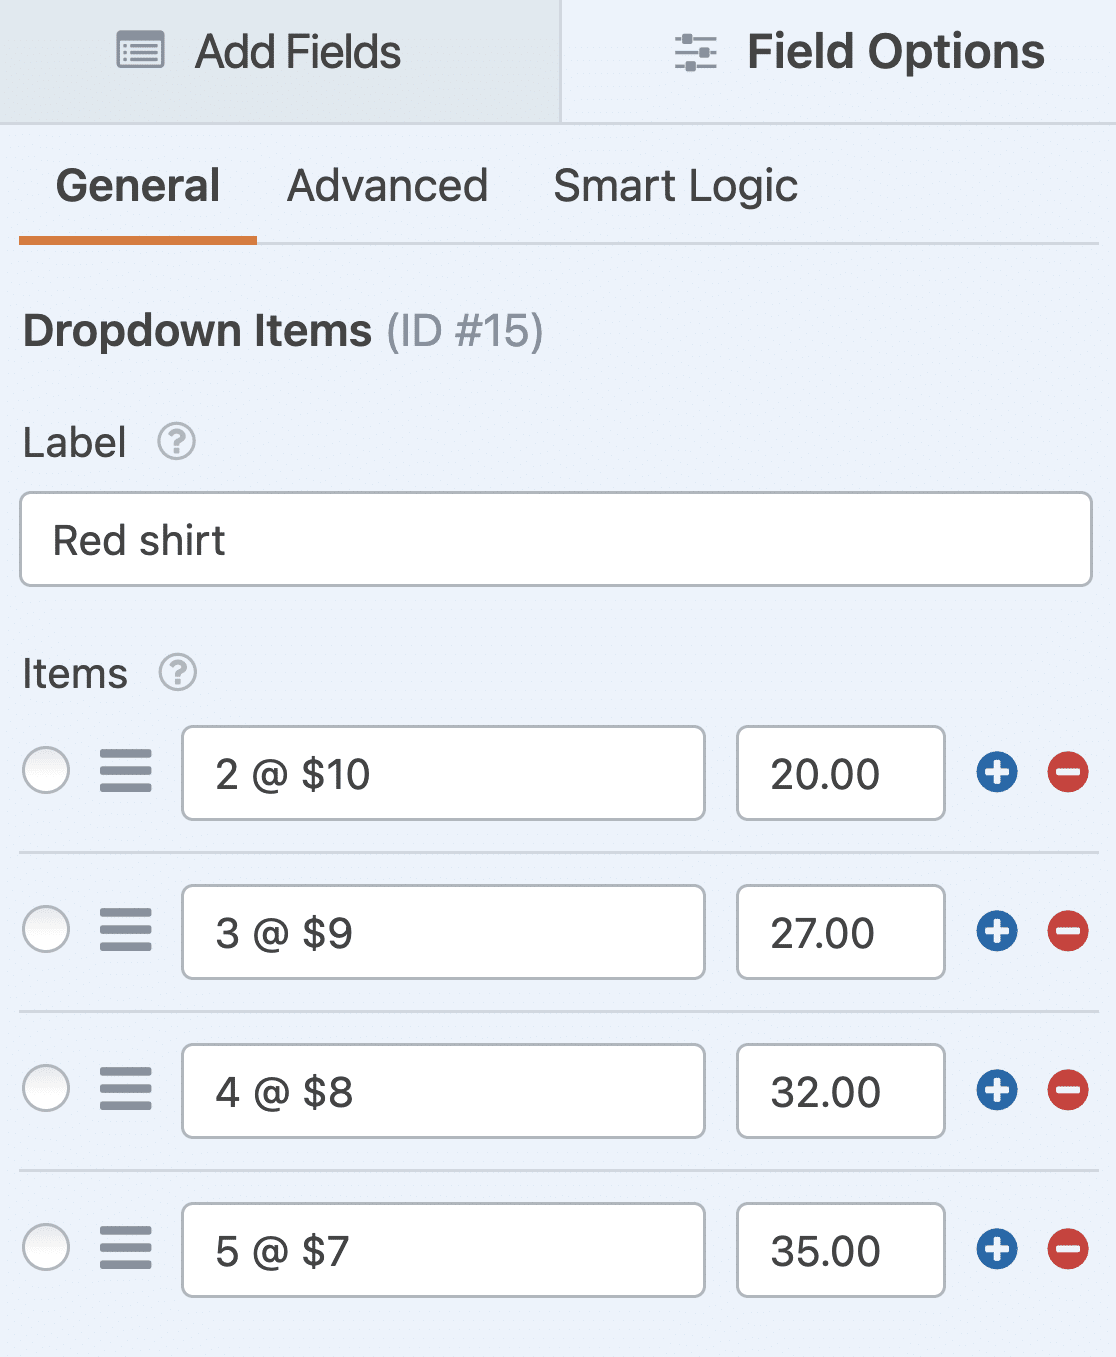 The field options for the Dropdown Items field